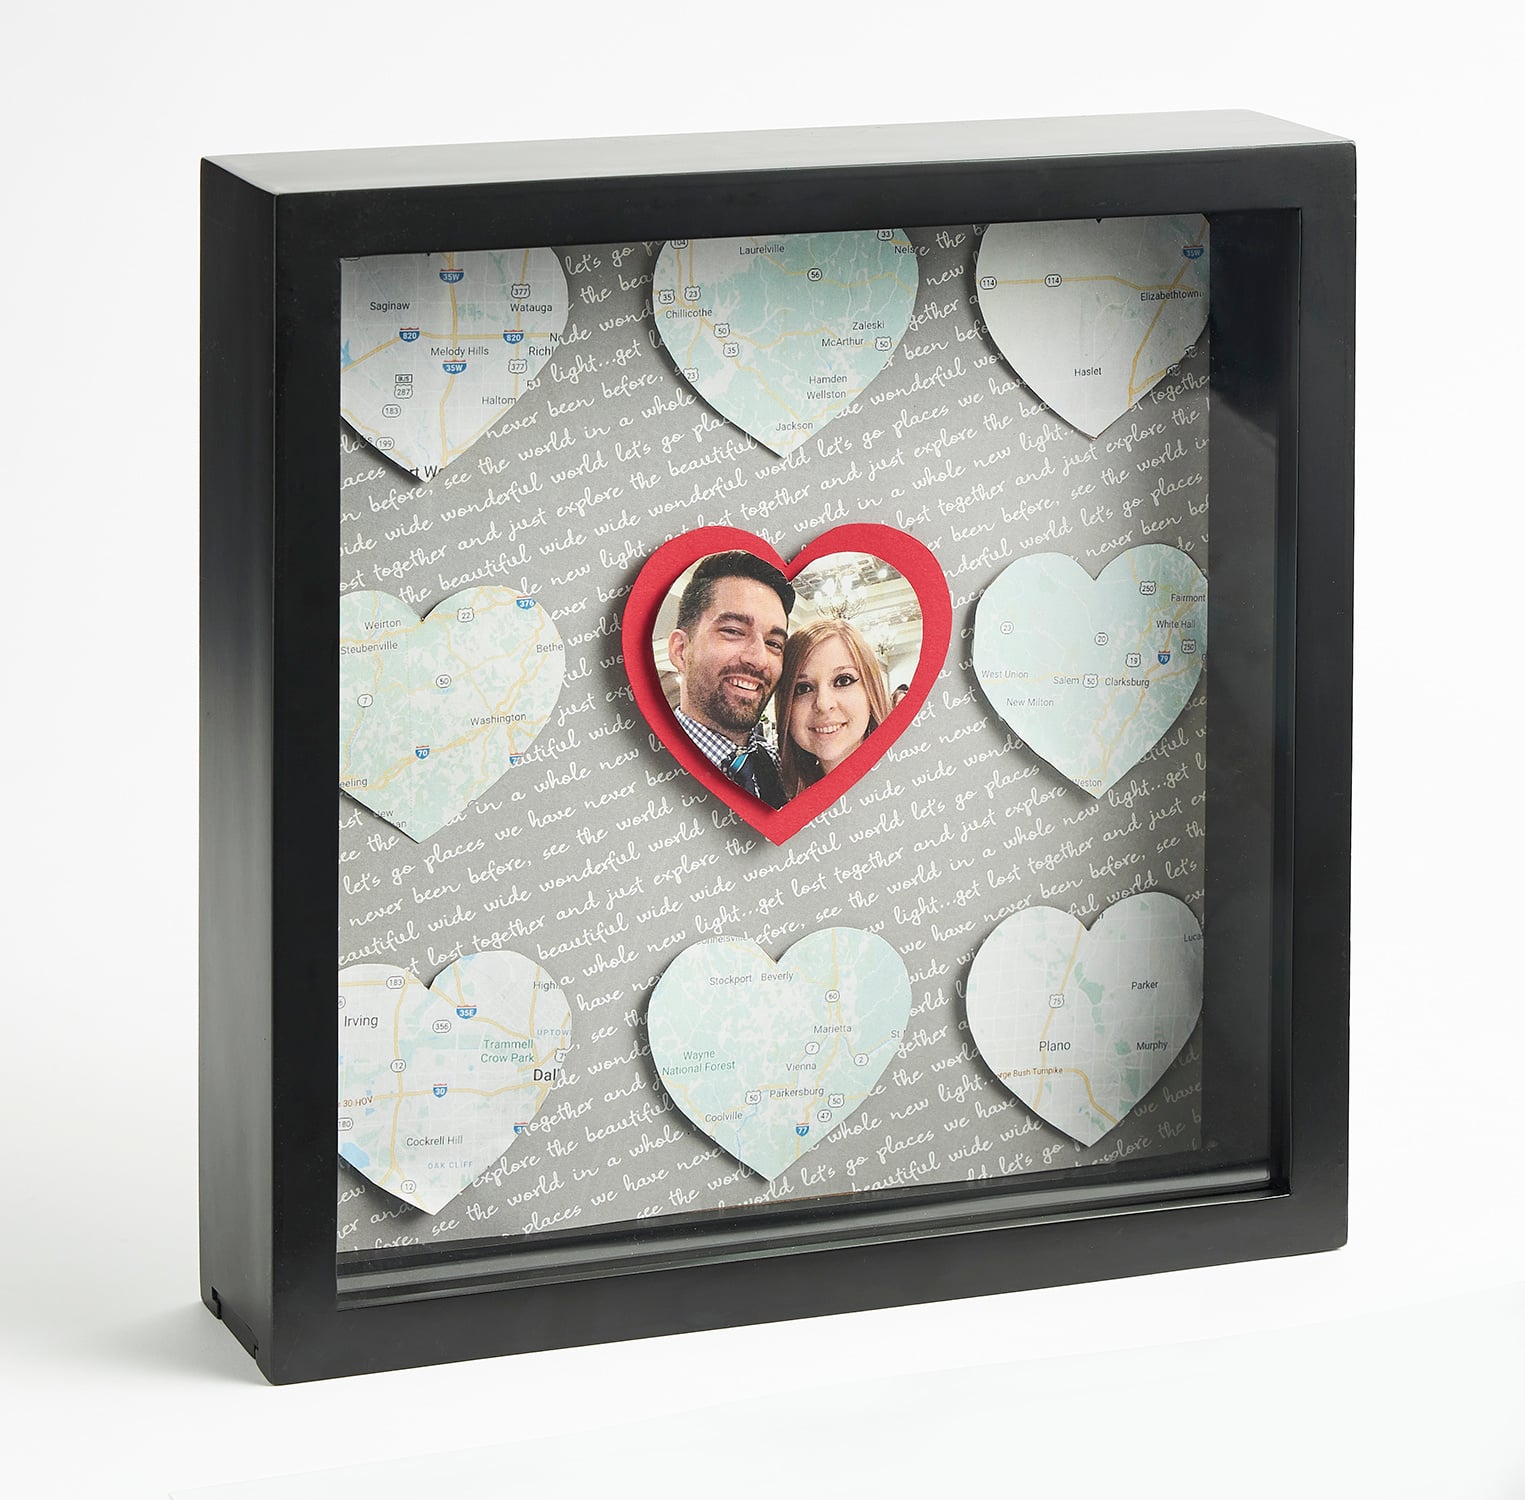 Anniversary /Valentines Day Gift Heart Candy Shadow Box